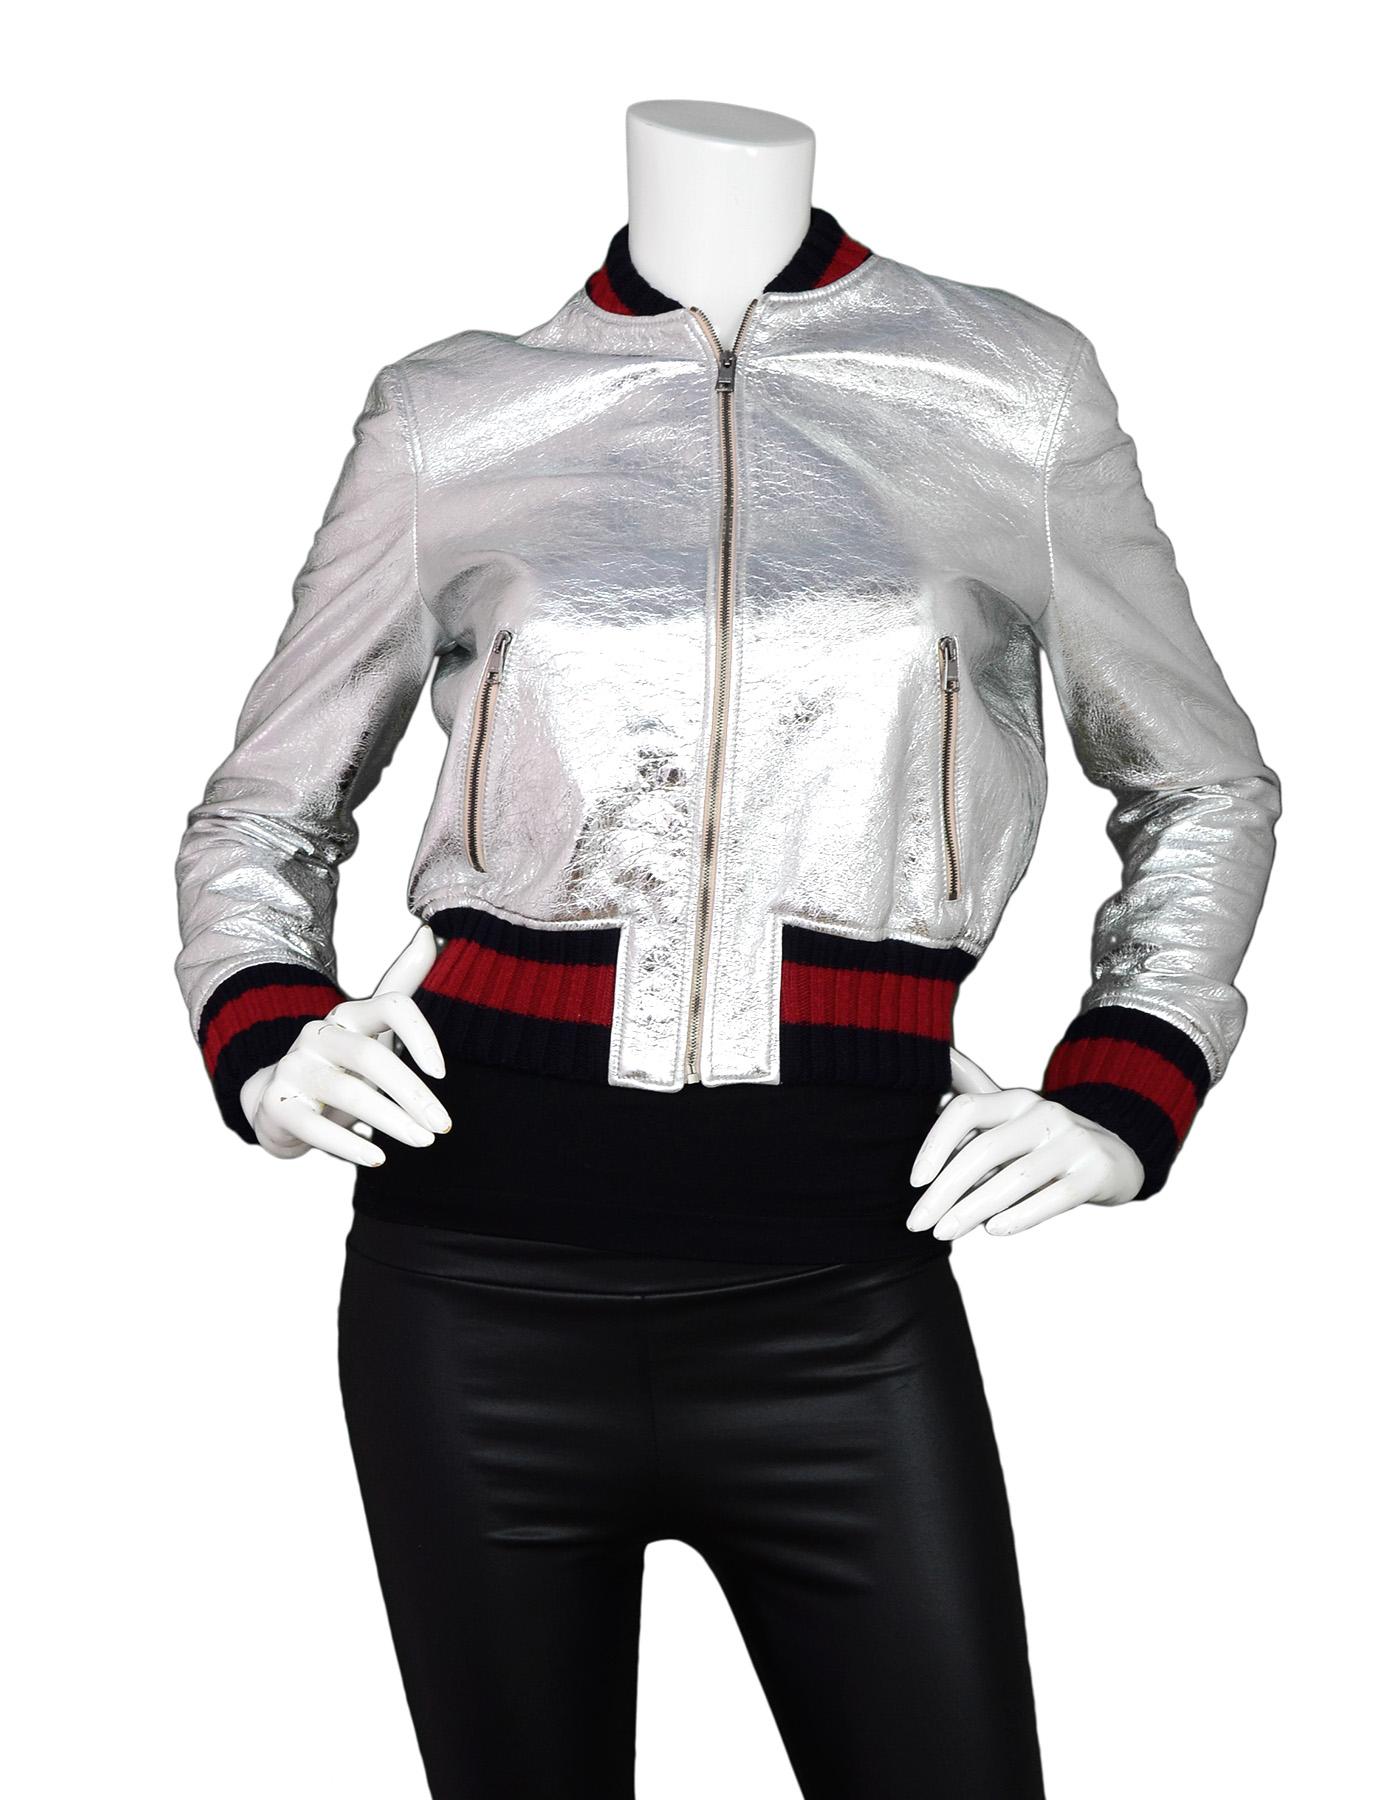 Gucci 2016 Resort Runway Crackled Silver Leather Bomber Jacket.  Features navy and red web collar and cuffs

Made In: Italy
Color: Silver, red, navy
Exterior Composition: 100% lamb leather Exterior Trim: 96% wool, 3% nylon, 1% elastane
Interior